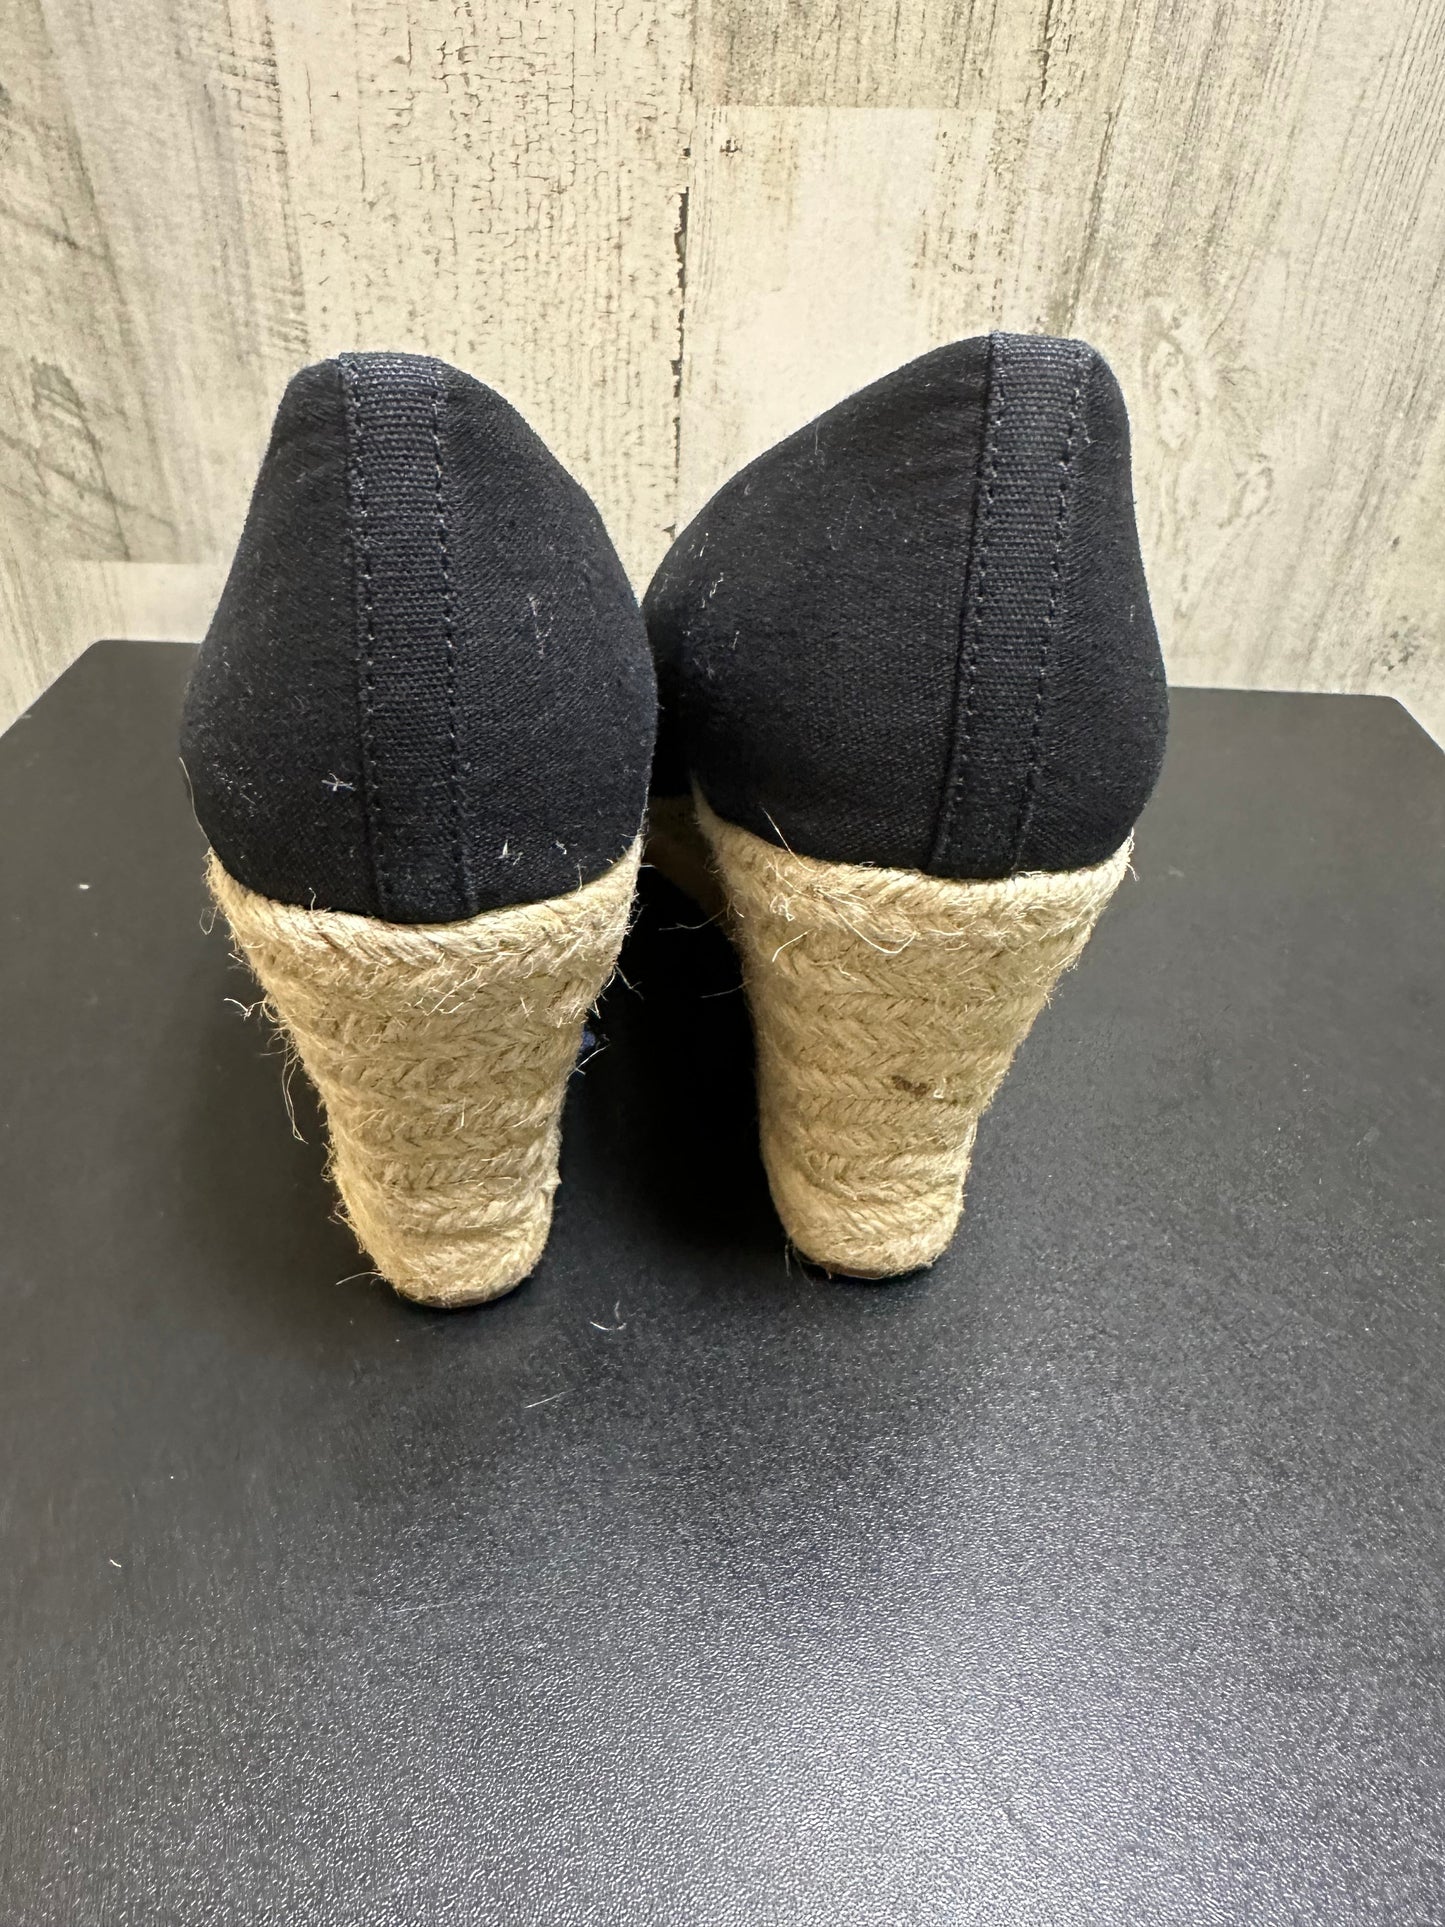 Shoes Heels Block By J. Crew  Size: 6